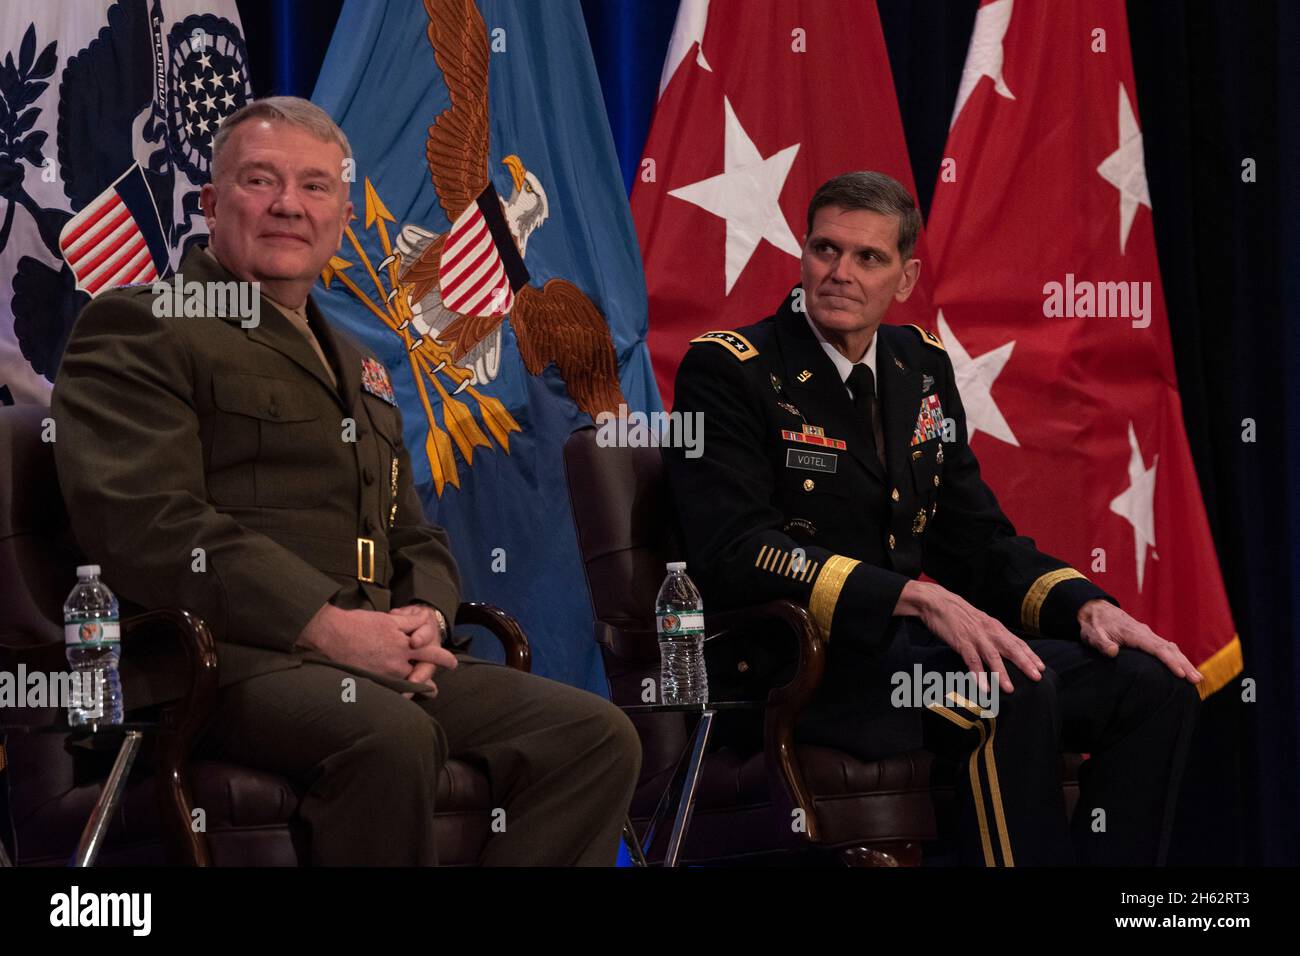 Reportage:   The new commander of U.S. Central Command, U.S. Marine Corps Gen. Kenneth F. McKenzie Jr., and the outgoing Centcom commander, U.S. Army Gen. Joseph L. Votel, are seen at the Centcom change of command, Tampa, Florida, March 28, 2019. Stock Photo